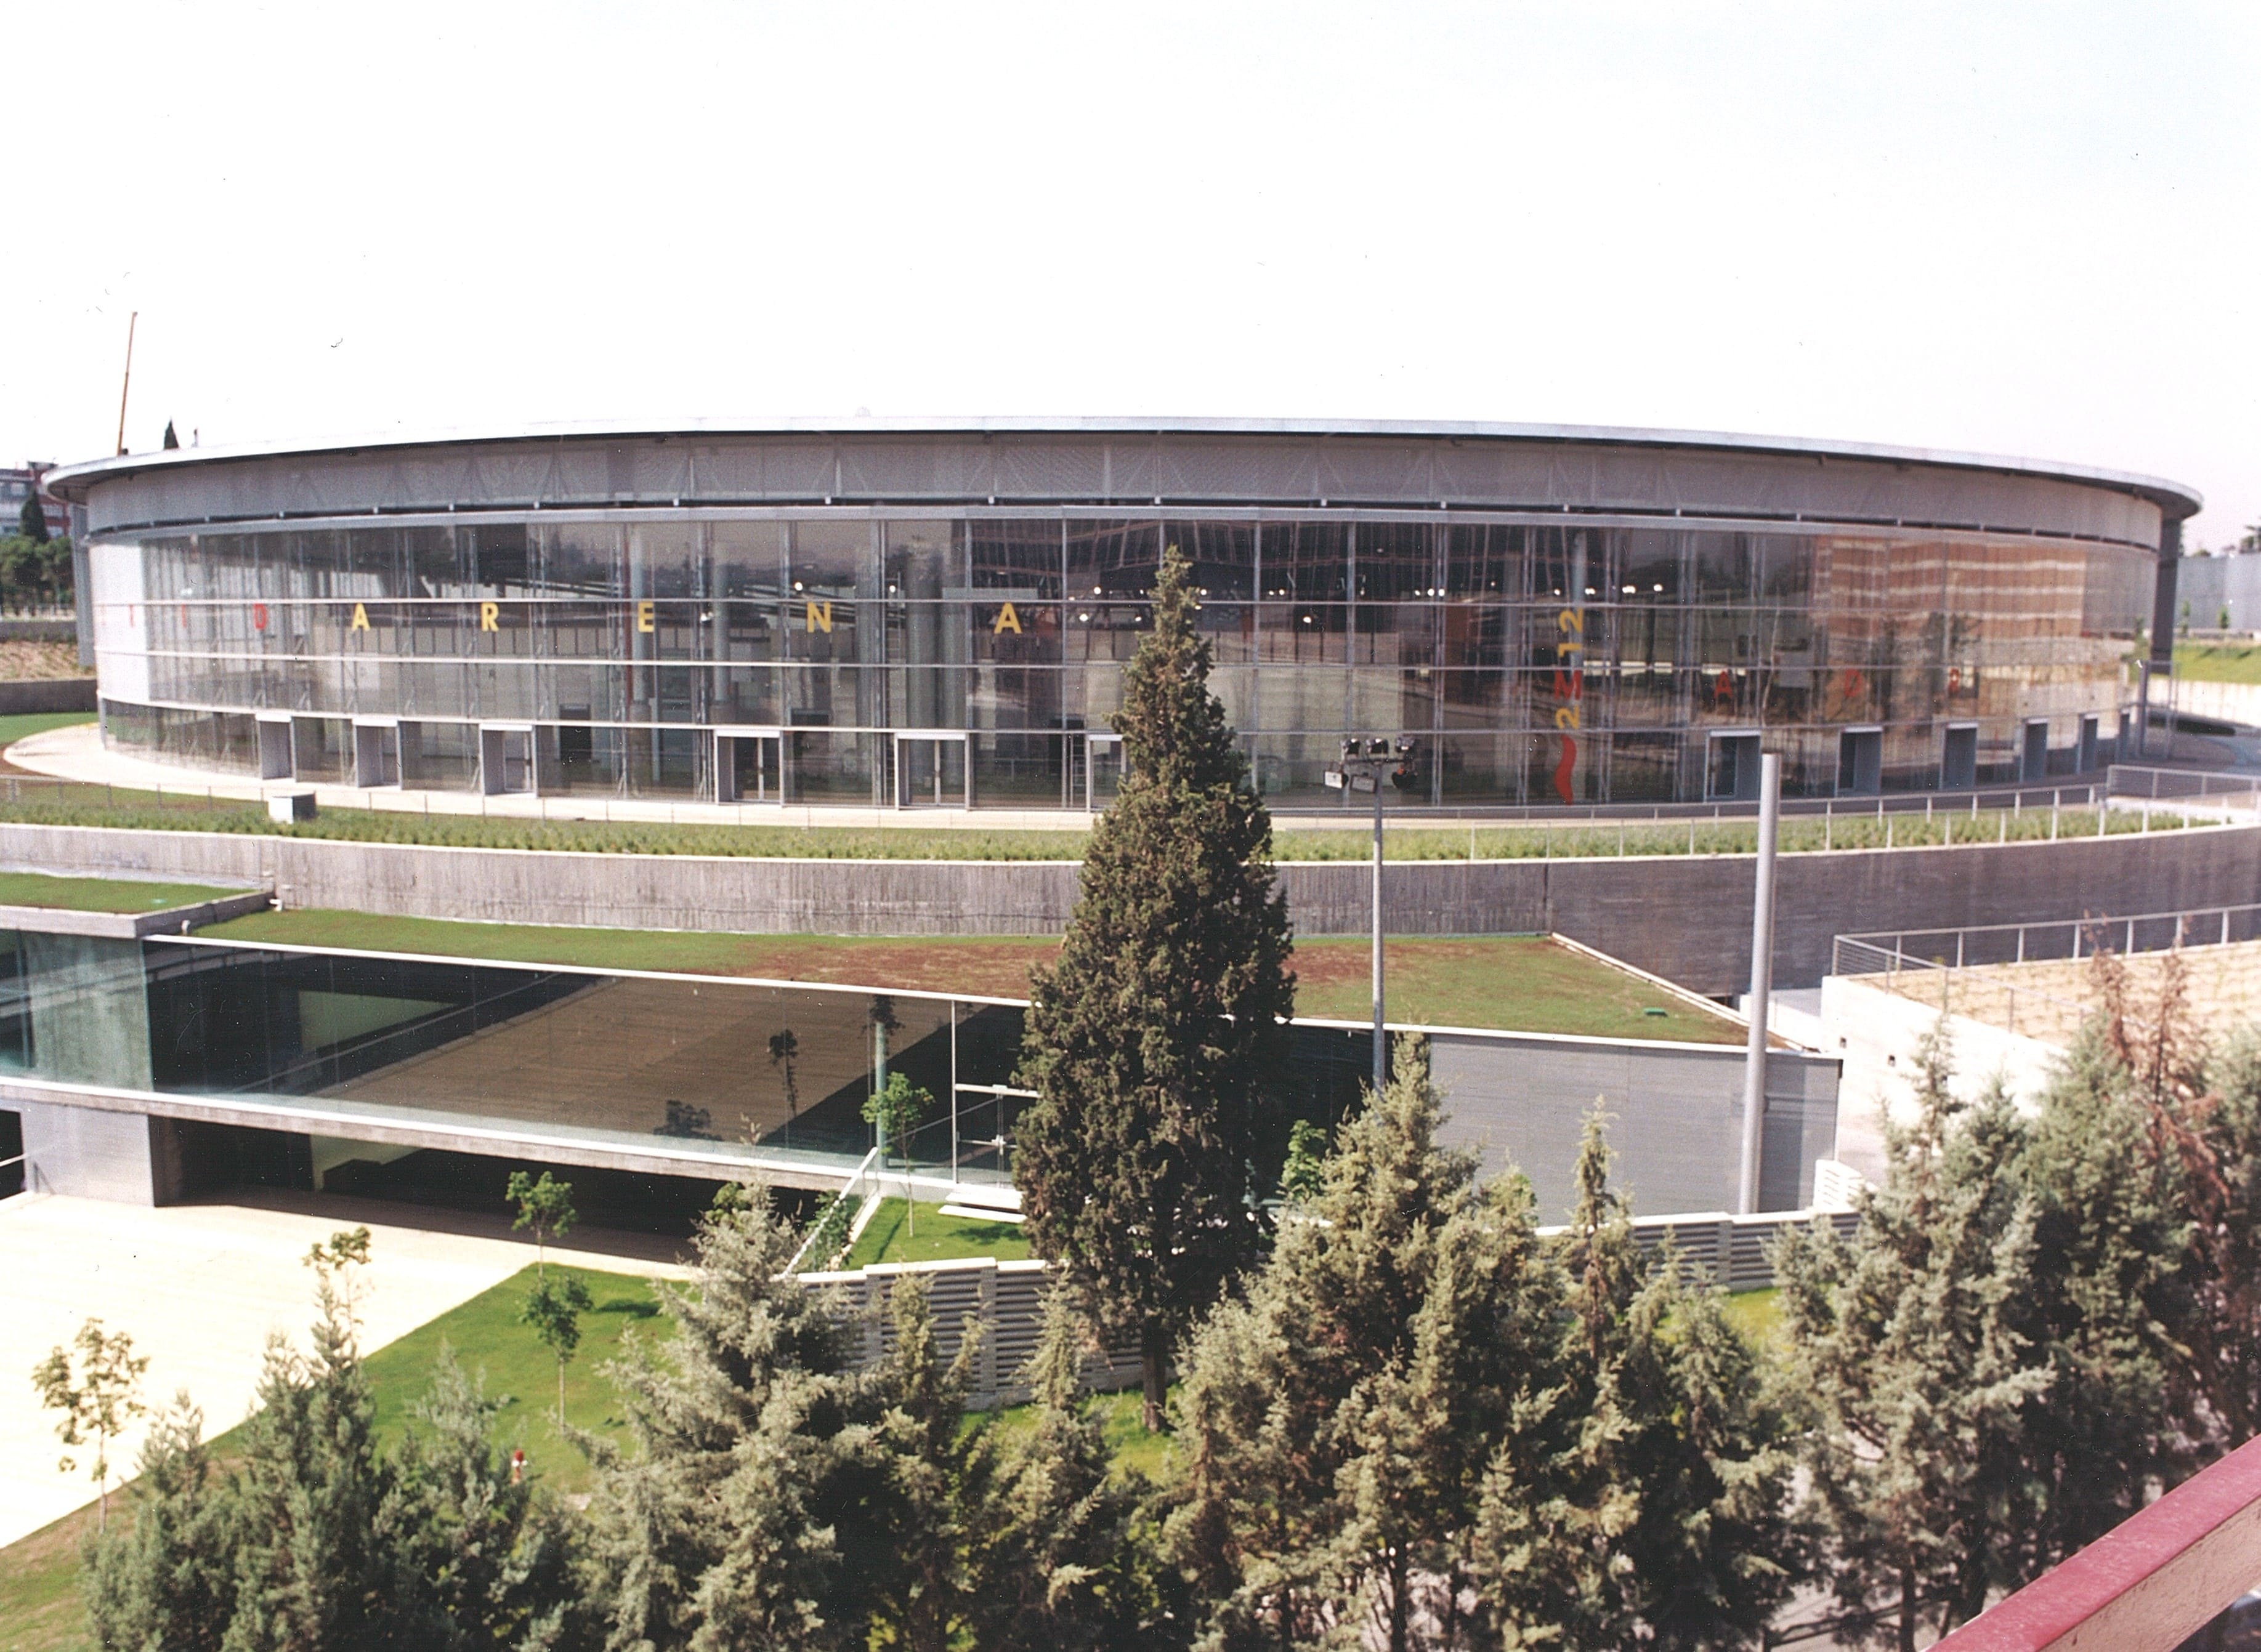 Circular facade and moat of the Madrid Arena Pavilion